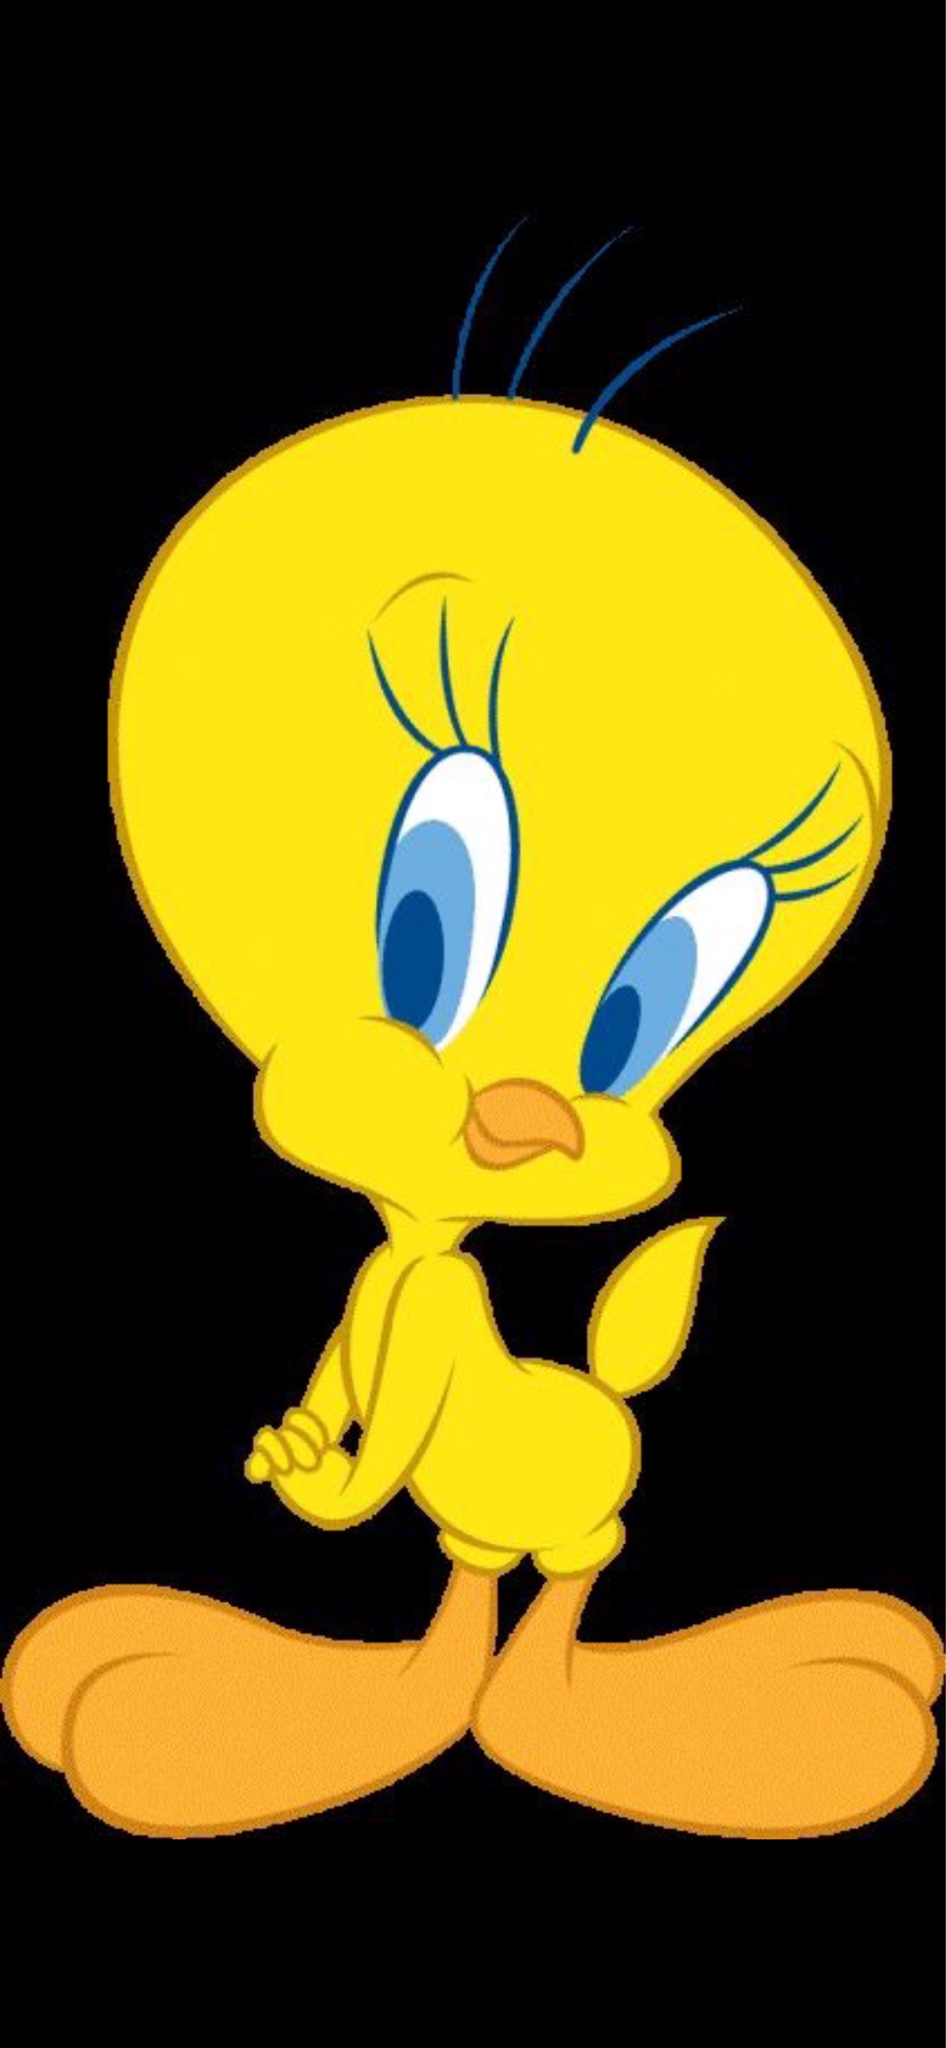 Tweety Bird On Black Background - Animated Don T Worry Be Happy , HD Wallpaper & Backgrounds